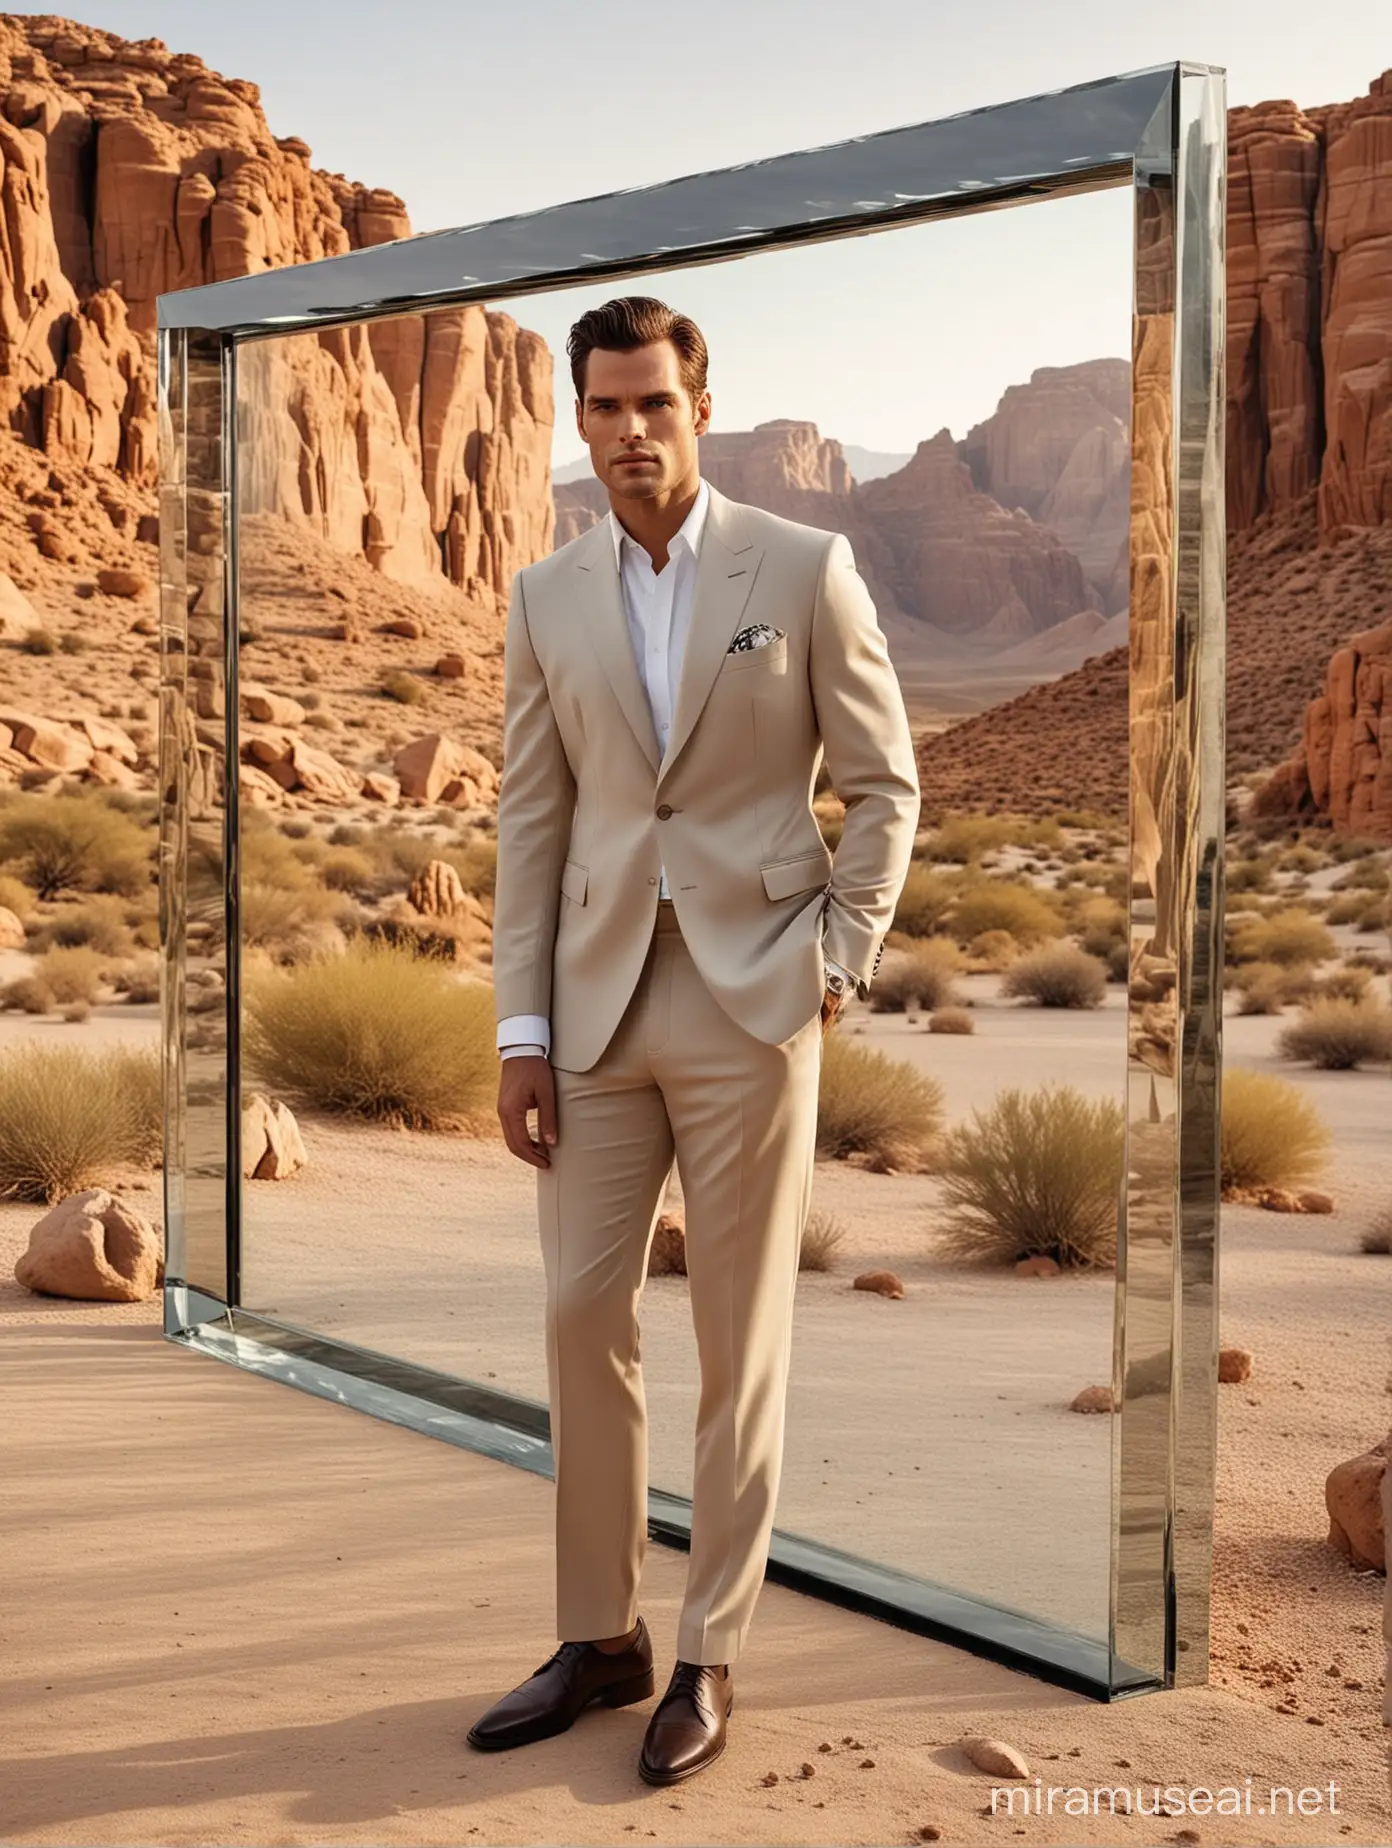 Title: "Desert Elegance: Hugo Boss's Exclusive Men's Fashion Campaign"
Photo taken indoors with glass facing outside and reflection in the glass. 
Nestled within the desert's captivating scenery, Hugo Boss presents its latest men's collection, marrying sophistication with the rugged allure of nature. Mark Vanderloo and Henry Cavill epitomize confidence in impeccably tailored suits, reminiscent of Hugo Boss's iconic style.

Amidst the desert backdrop, the campaign features structured blazers and sleek trousers, each piece reflecting Hugo Boss's unparalleled craftsmanship. The interplay of light and shadow accentuates the garments' luxurious textures, creating an atmosphere of refined elegance.
Glass house on the rock
As the sun casts its golden glow across the contemporary desert retreat, Hugo Boss invites you to experience the fusion of timeless sophistication and modern allure. Join us in embracing the essence of refined living amidst the desert's timeless beauty